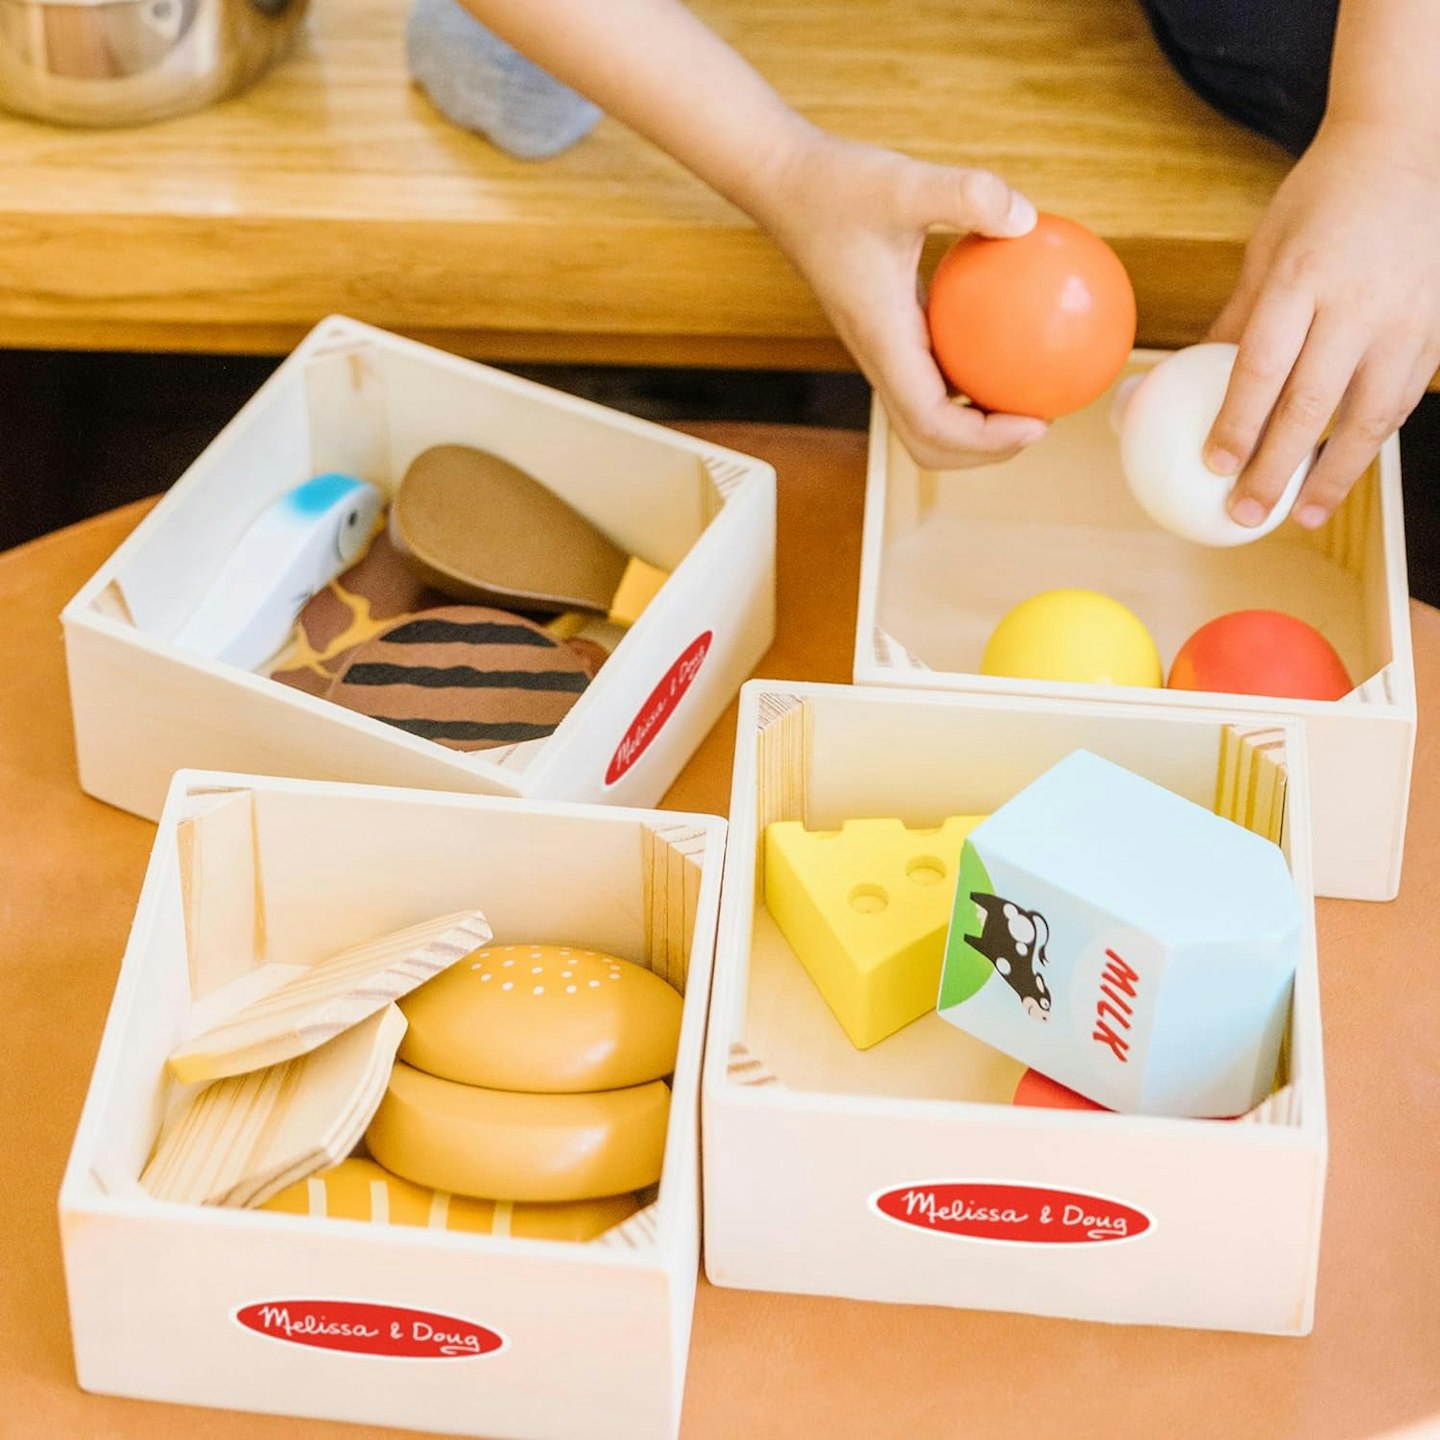 Wooden play food with four crates to separate food groups